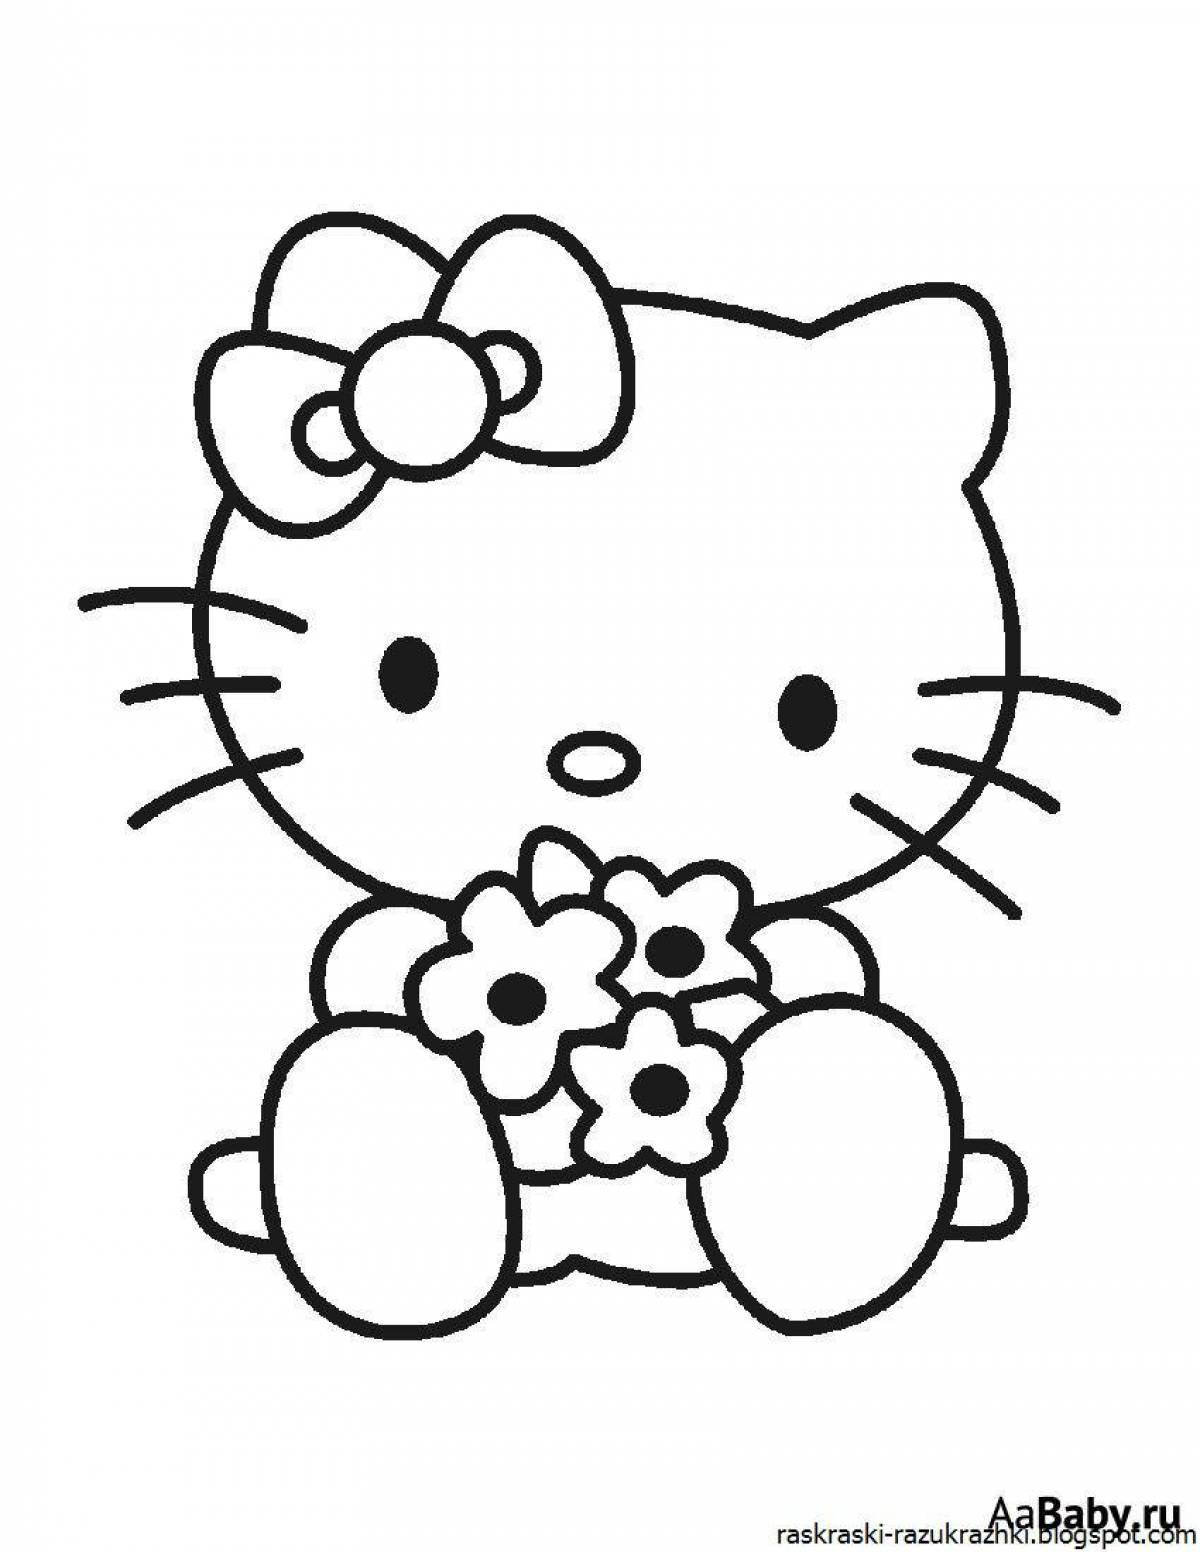 Playful hello kitty coloring book